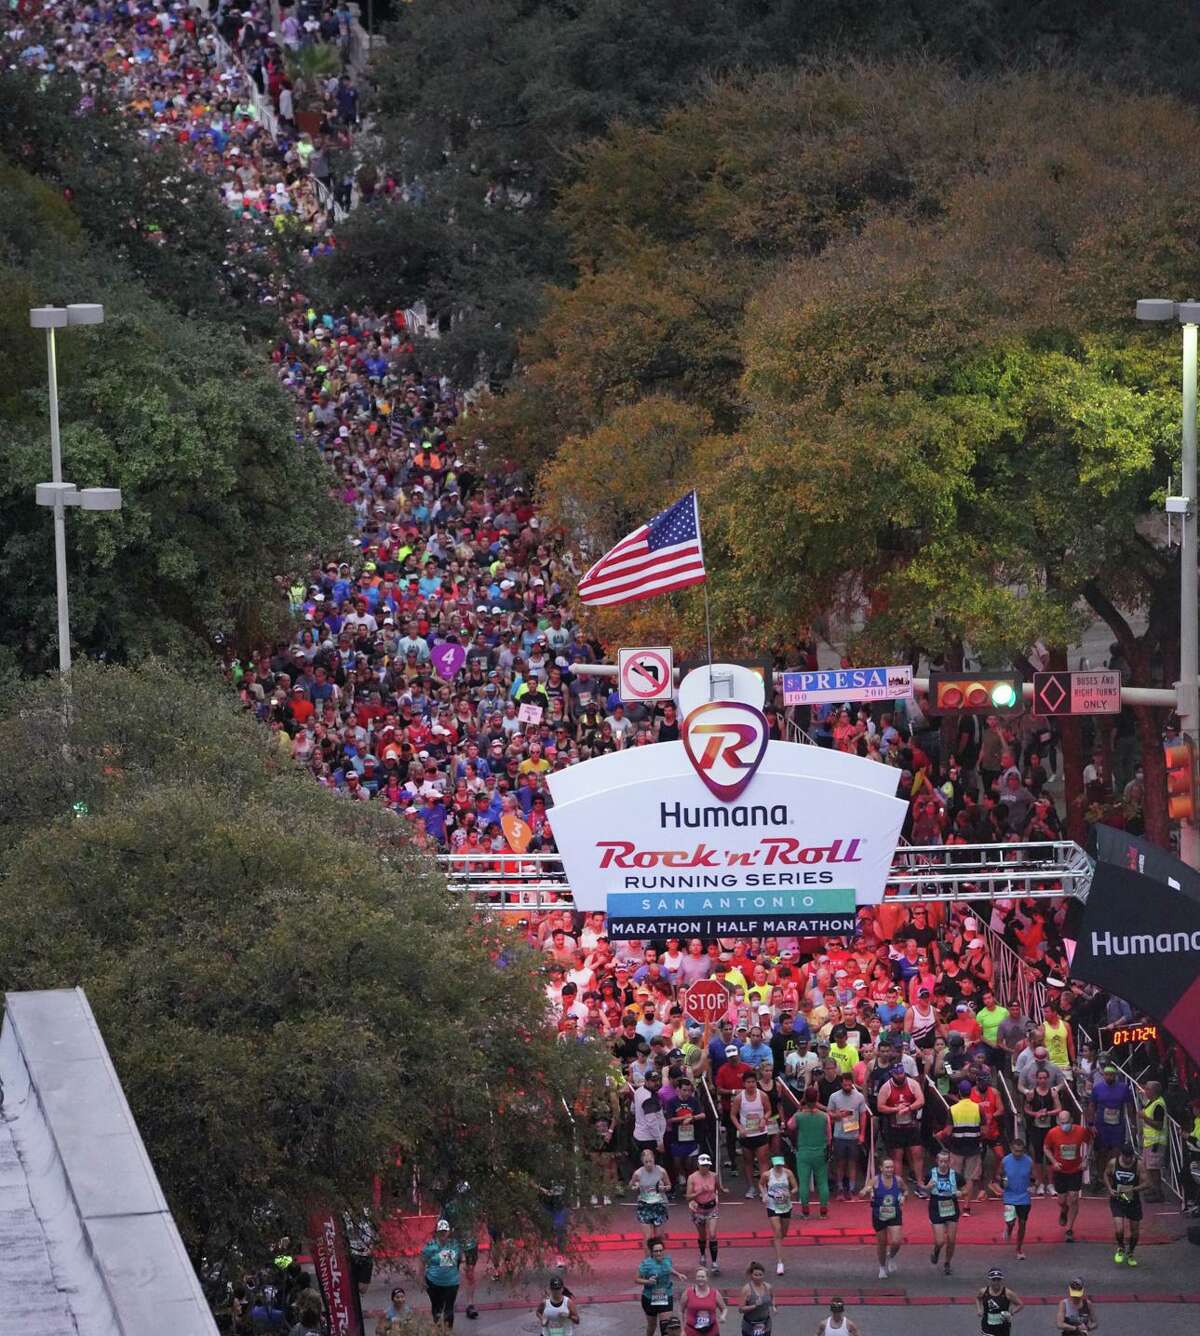 Runners start the Rock ‘n’ Roll Marathon along Market Street on Sunday morning. More than 18,000 were expected to participate in the two-day event.